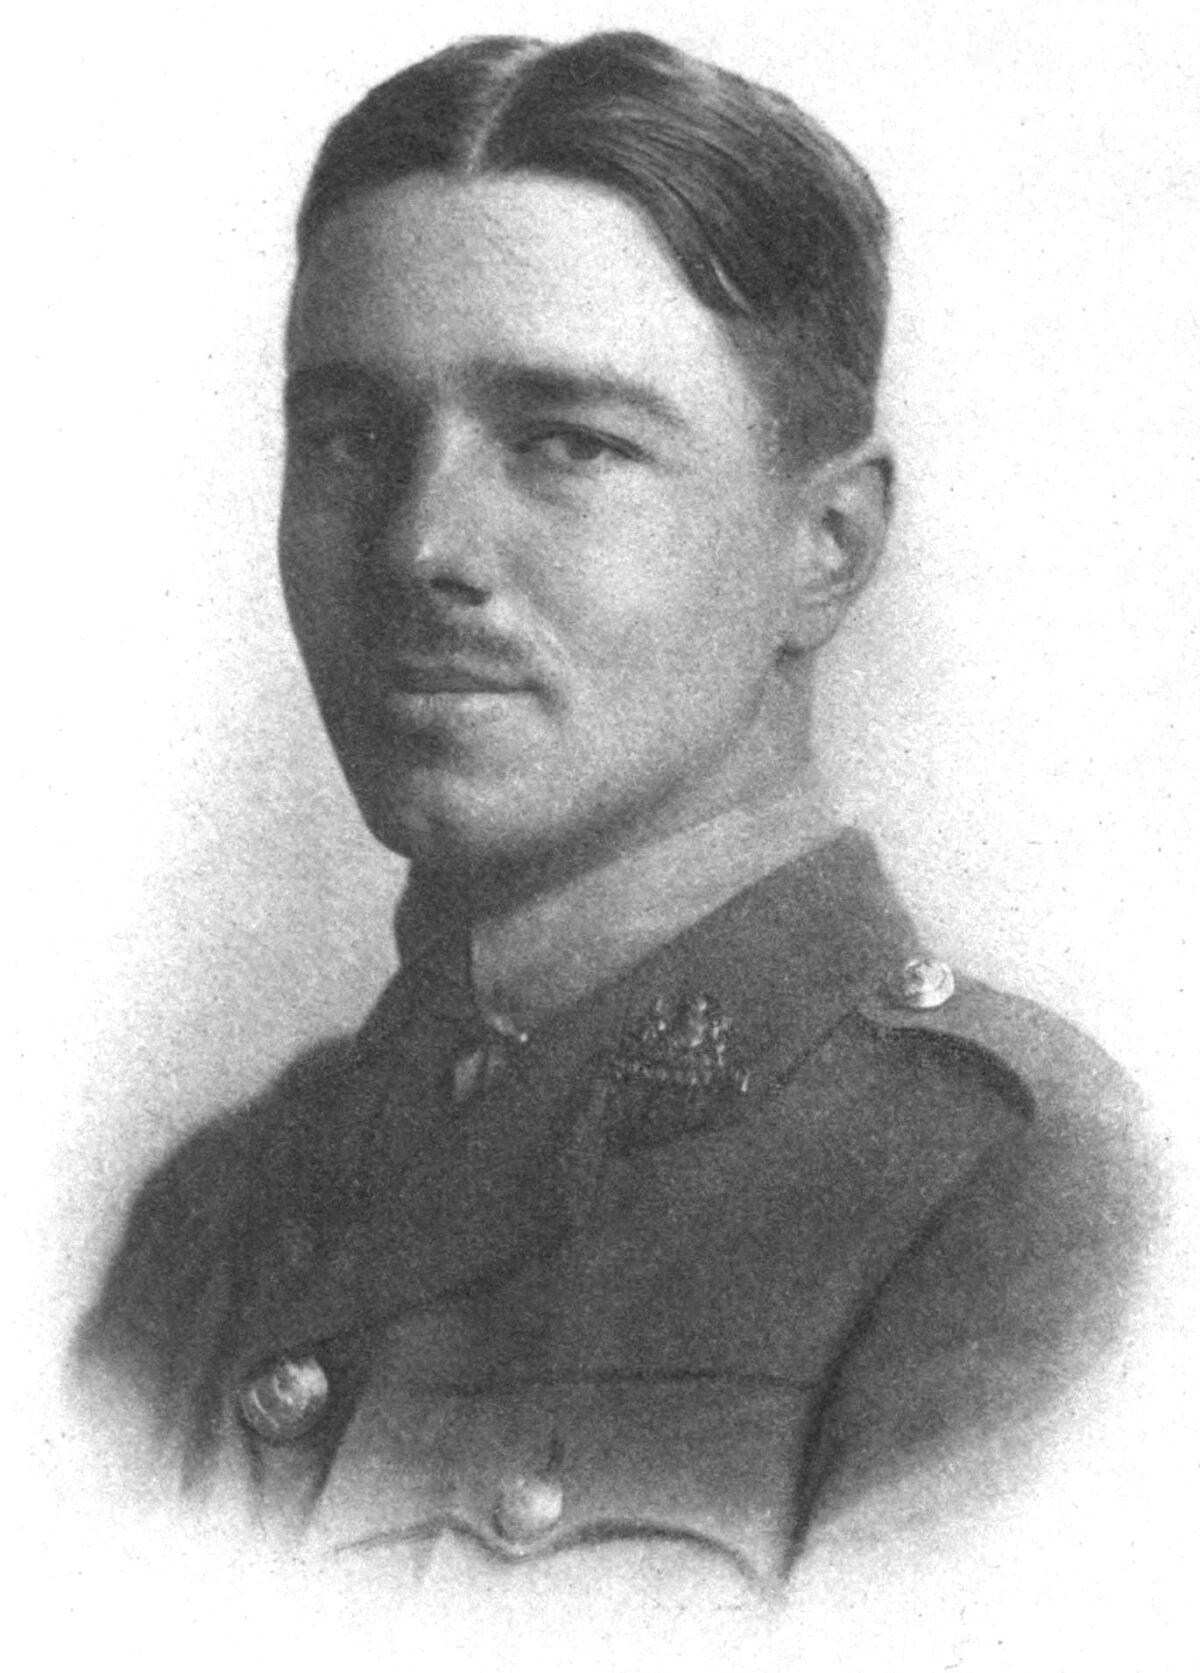 Poet Wilfred Owen from his "Poems" published in 1920. (Public Domain)